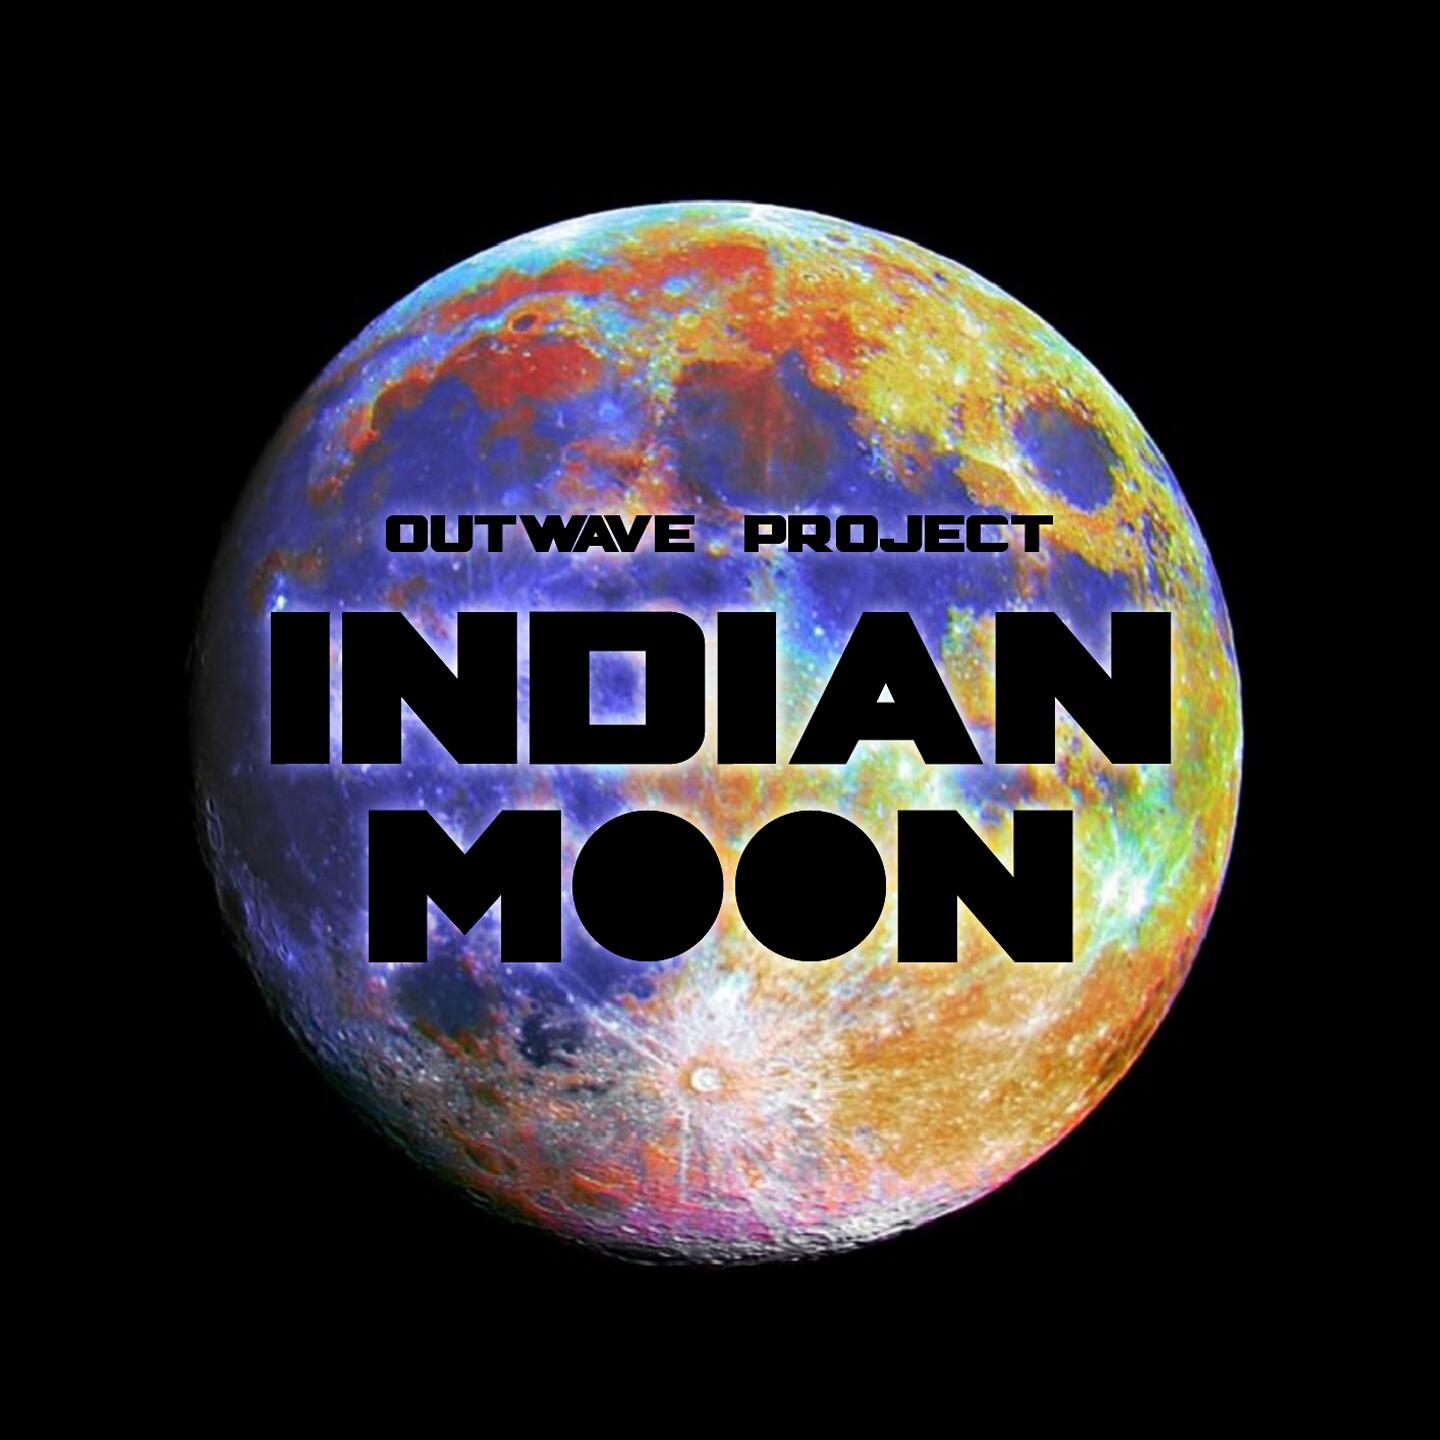 Outwave Project Indian Moon Iheartradio 